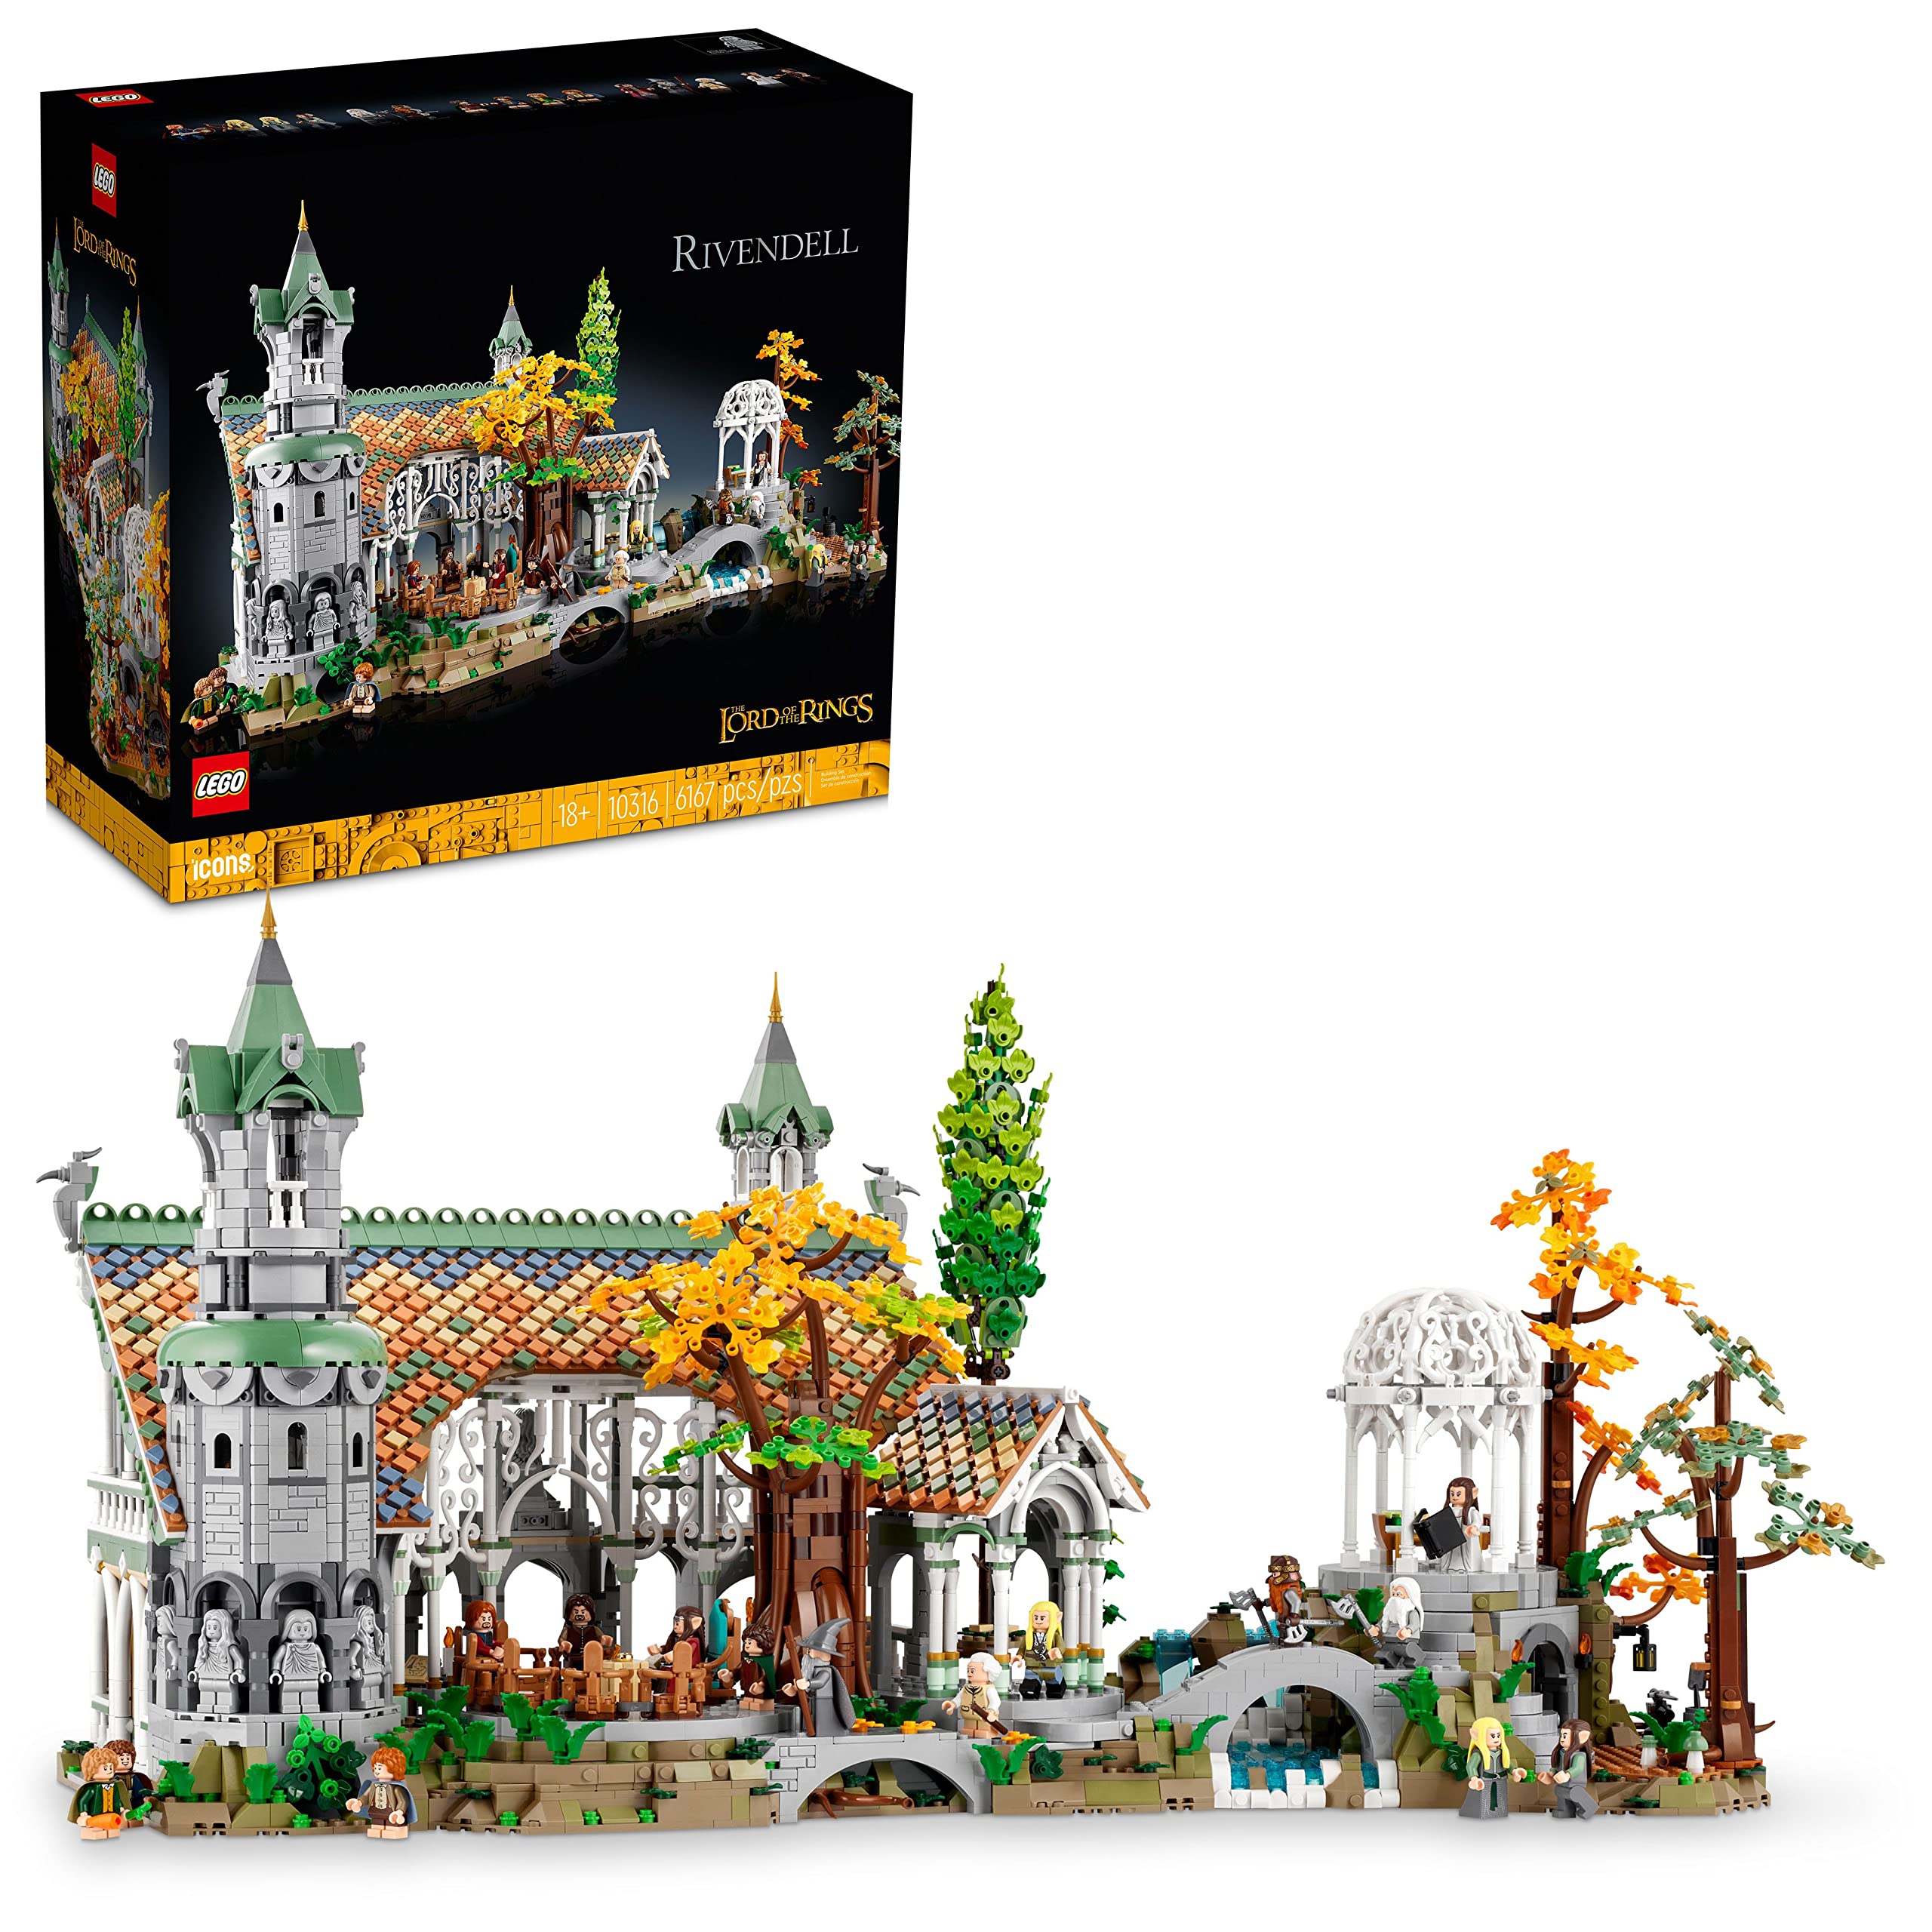 LEGO Icons The Lord of The Rings: Rivendell Building Model Kit for Adults, Construct and Display a Middle-Earth Valley with 15 Minifigures, A Great Gift for LOTR Fans and Movie-Lovers, 10316